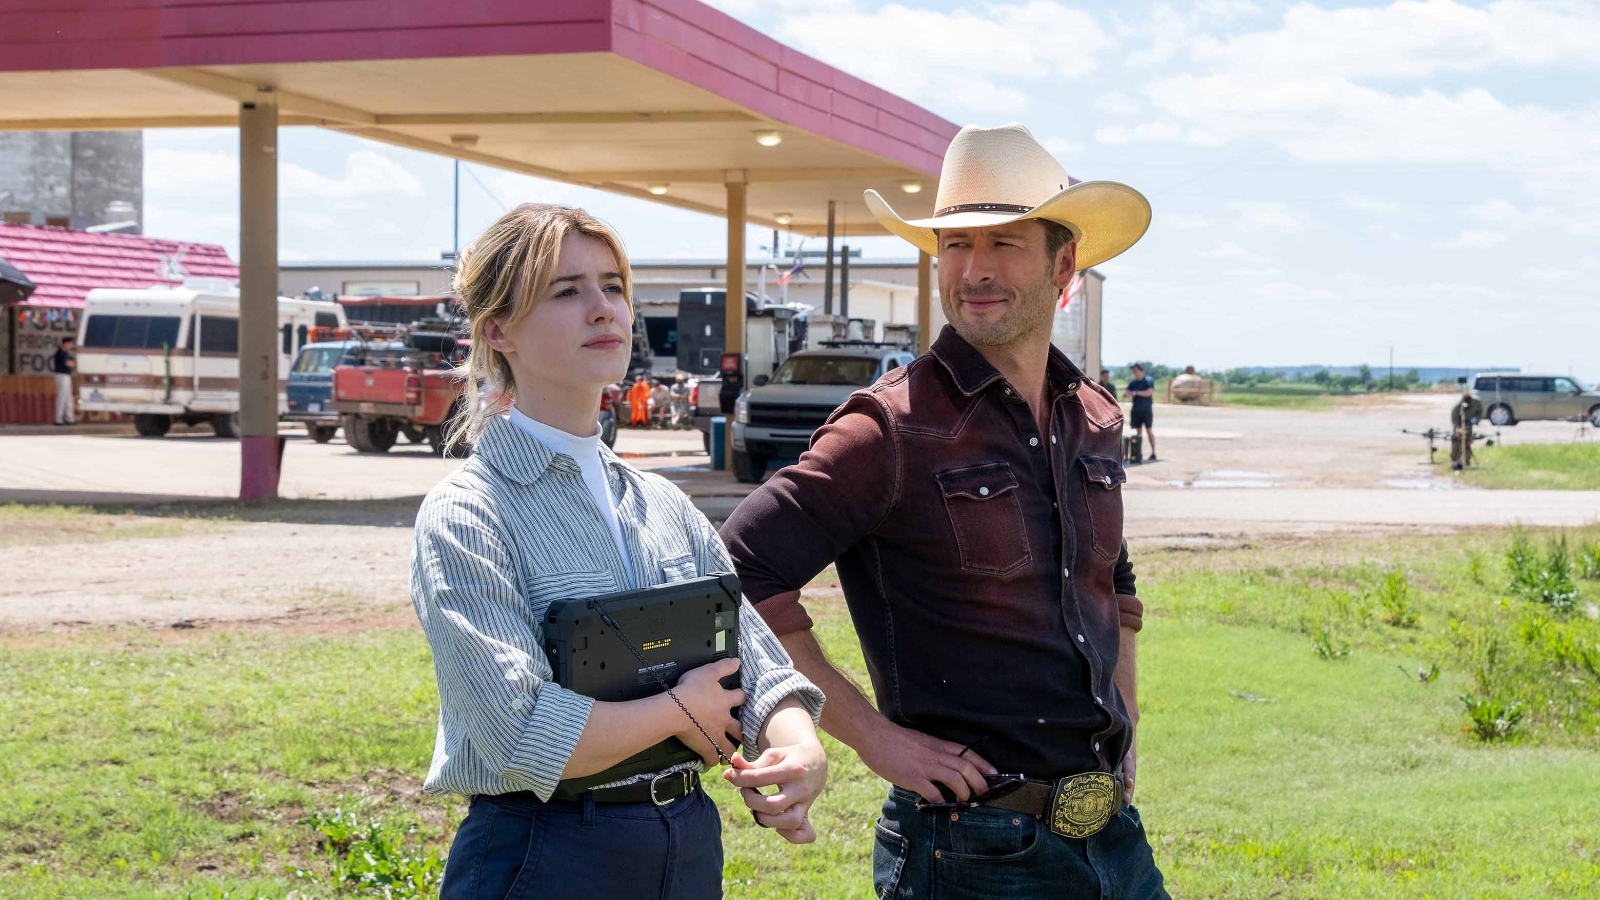 A still from the 2024 film 'Twisters' shows Glen Powell and Daisy Edgar-Jones standing in front of a gas station.